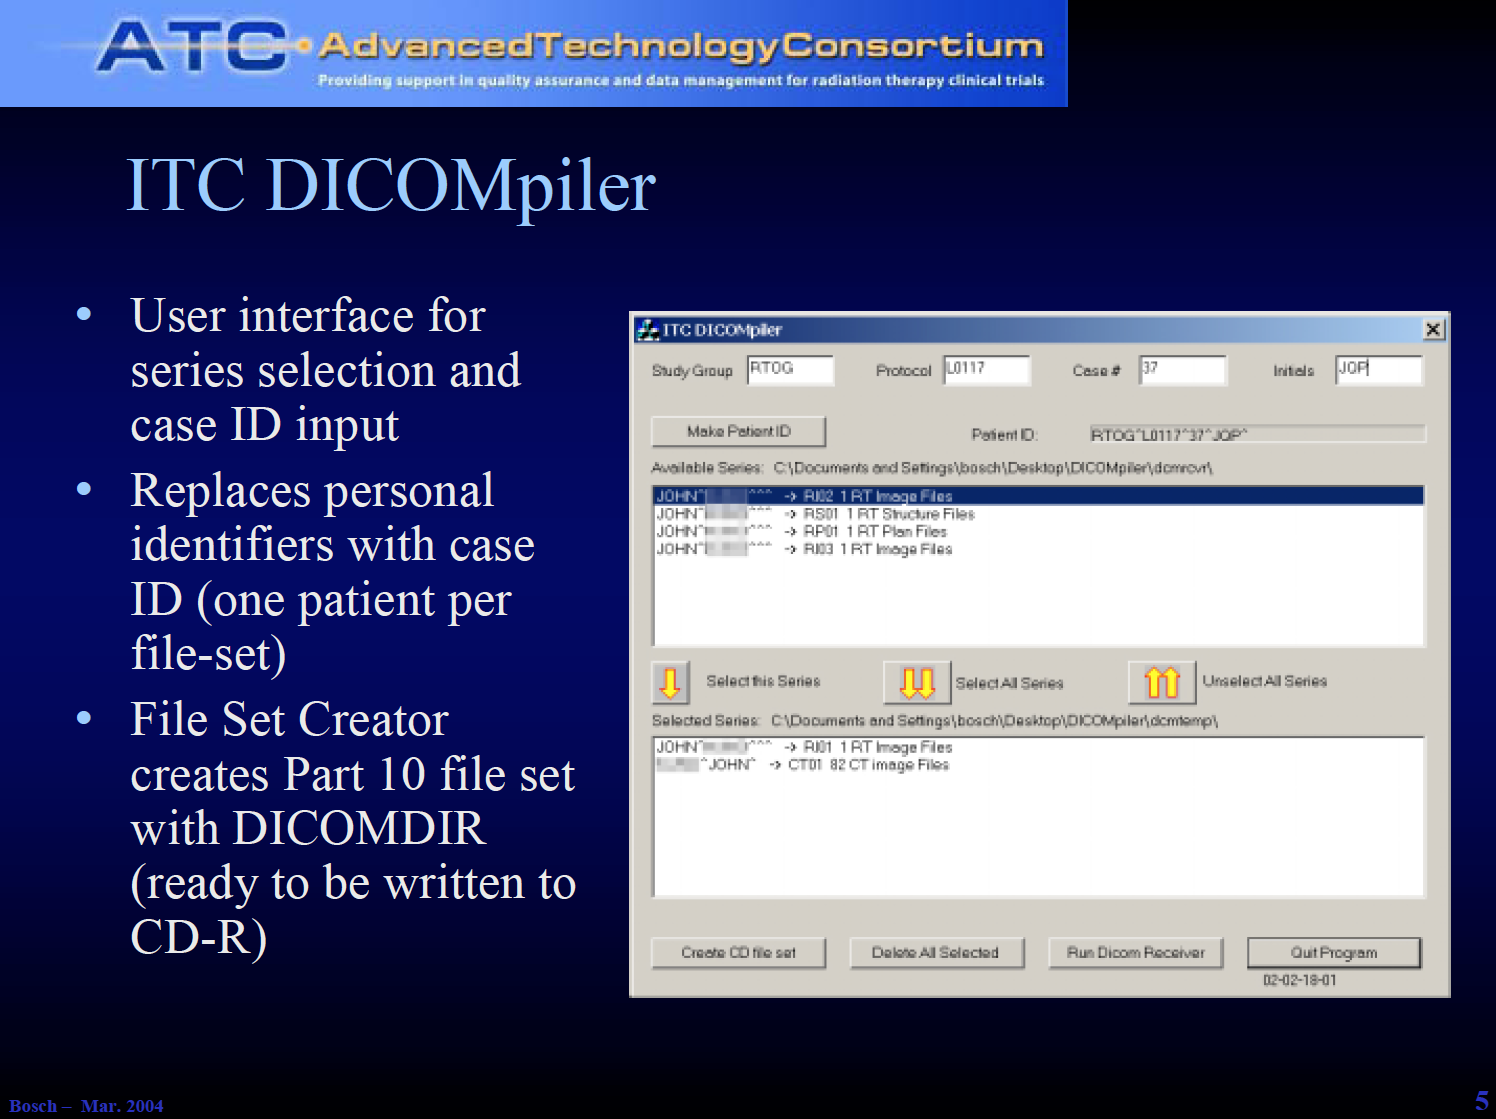 The ITC's DICOMPILER